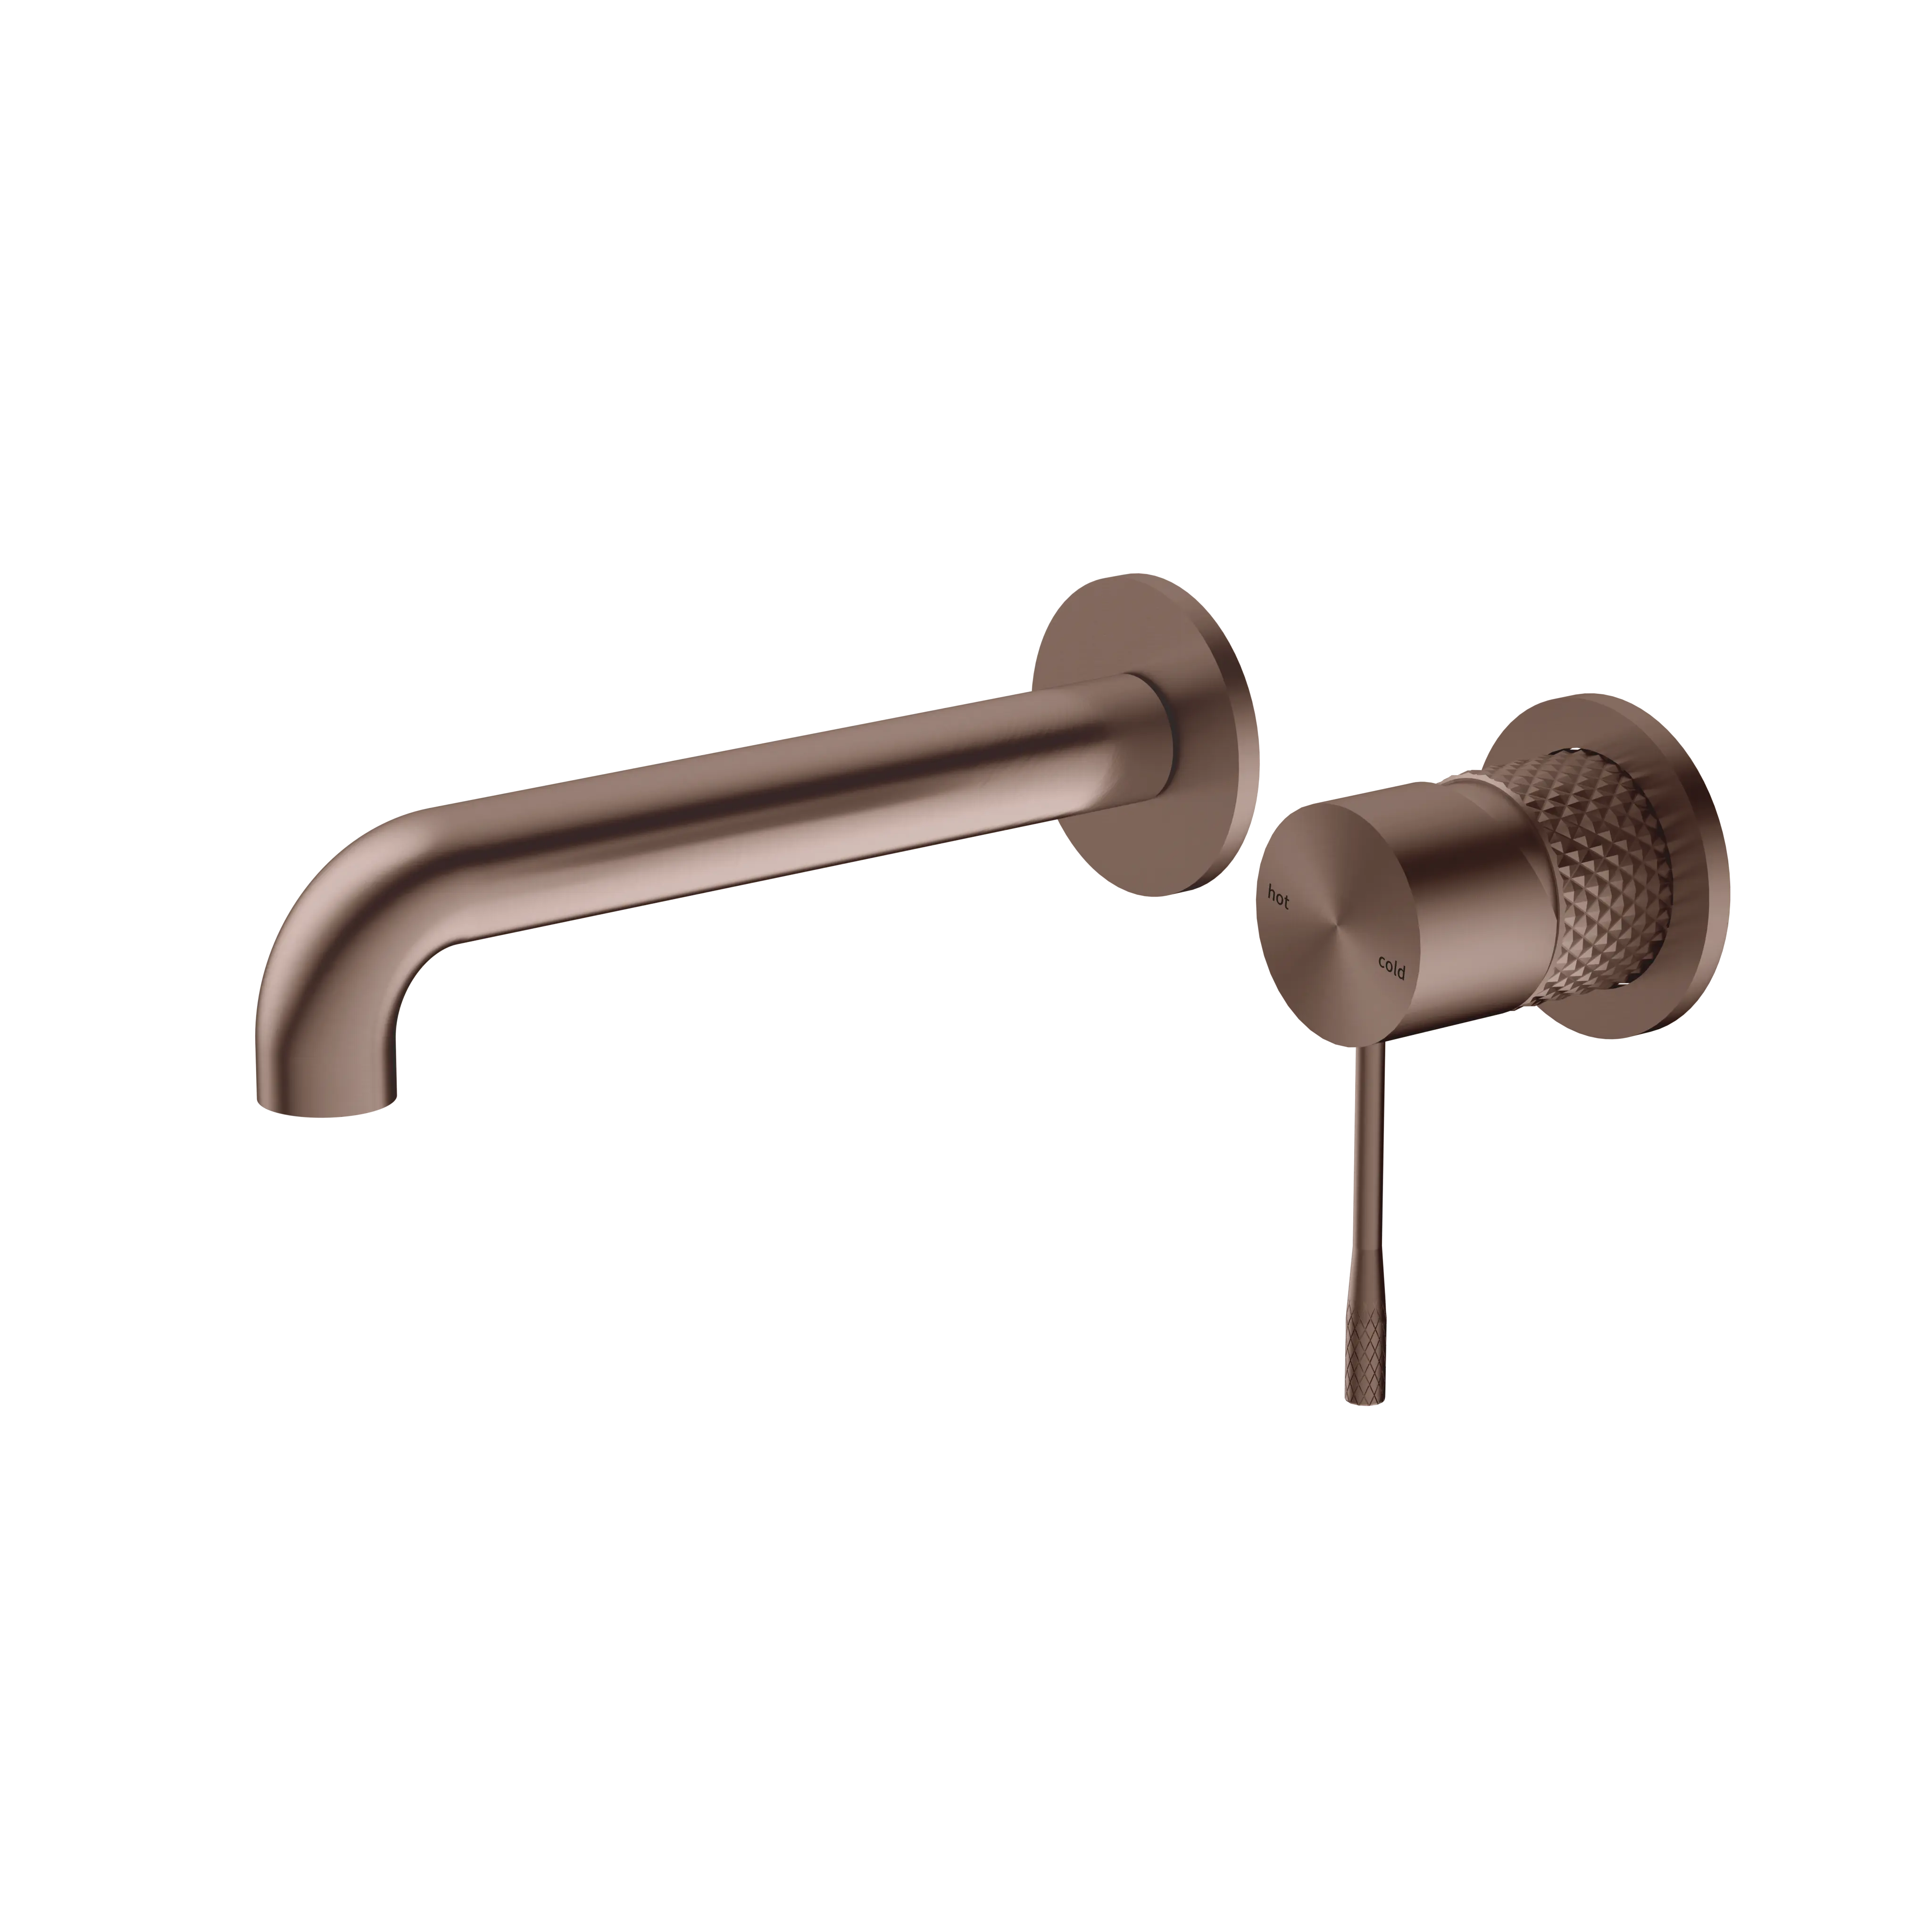 ZUKKI Modern Single handle Brushed bronze bathroom faucet 2 hole face copper lead-free basin faucet wall mounted